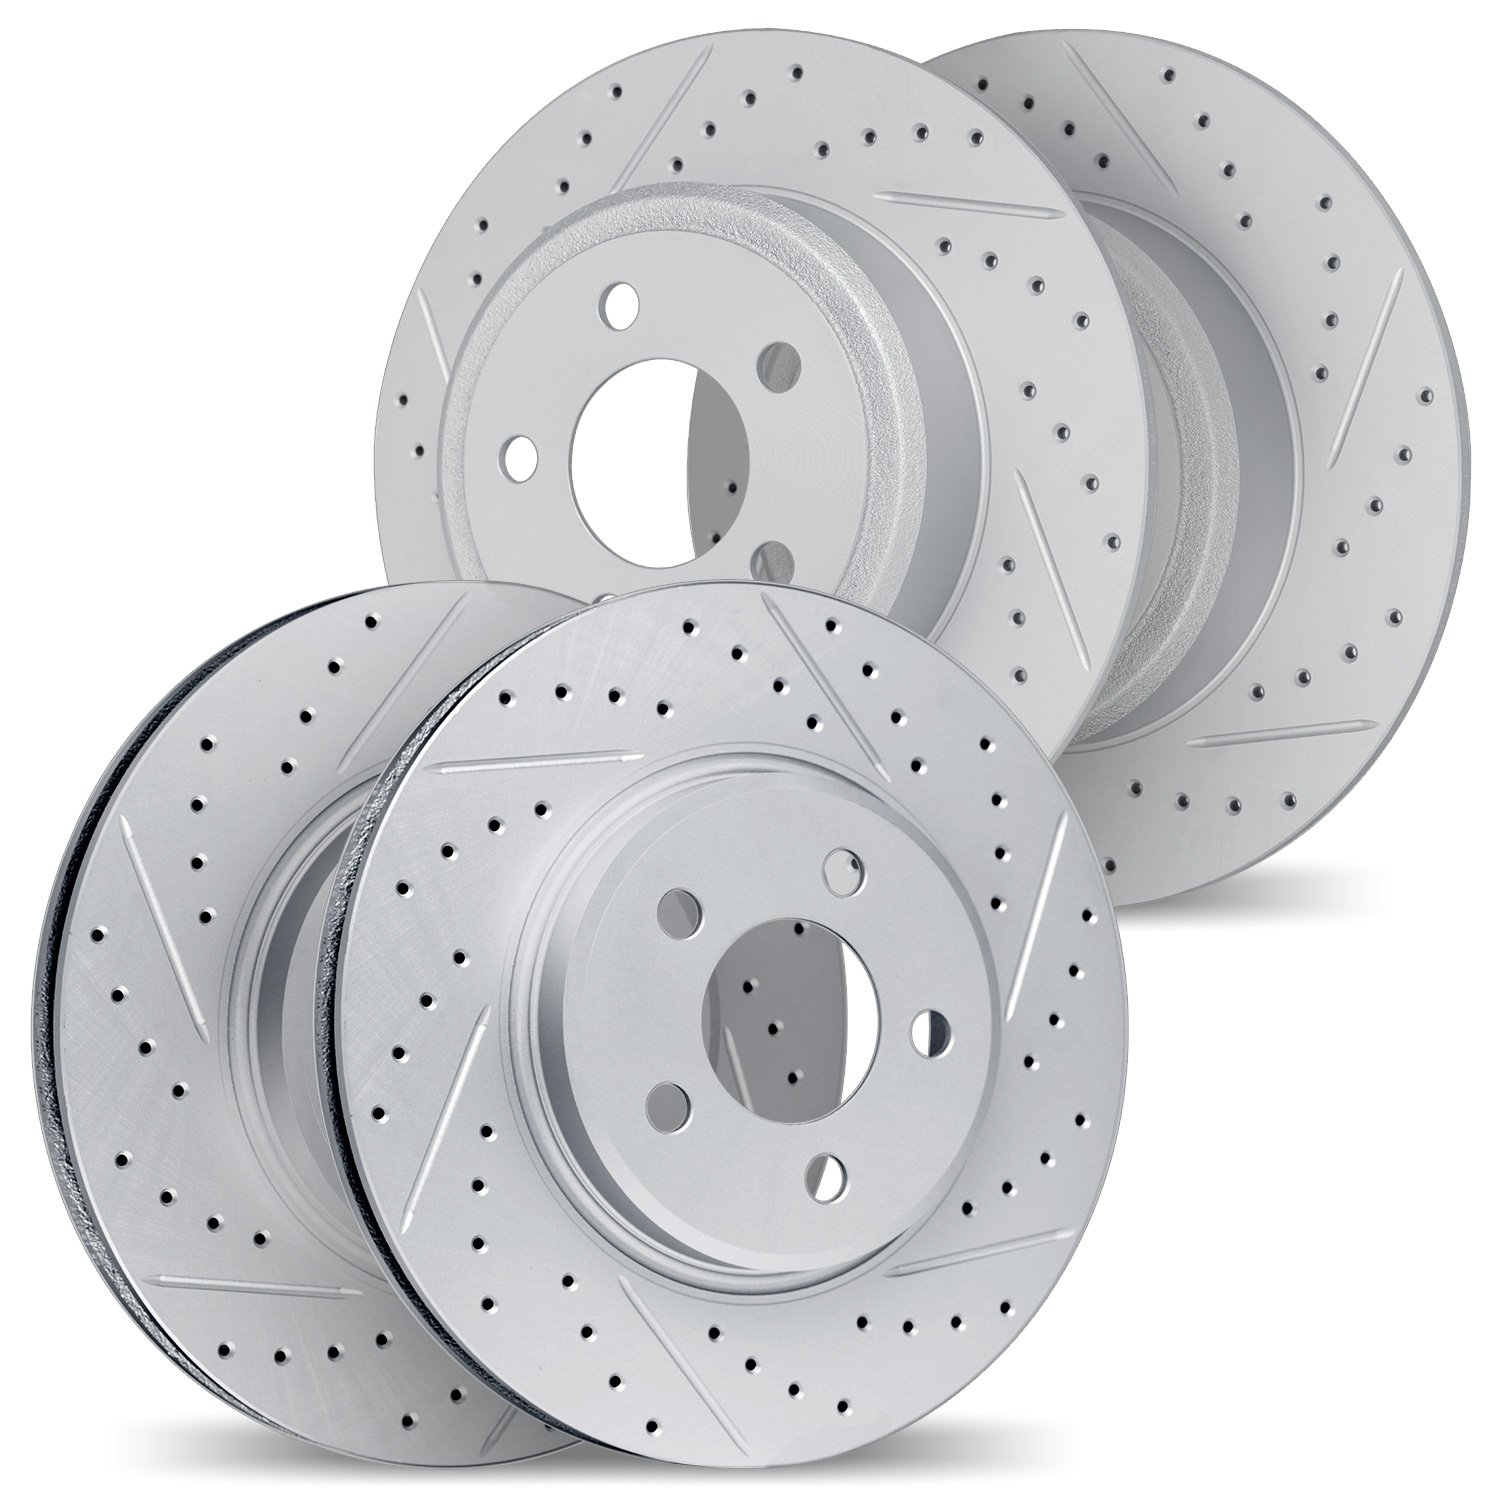 2004-73006 Geoperformance Drilled/Slotted Brake Rotors, 2008-2012 Audi/Volkswagen, Position: Front and Rear